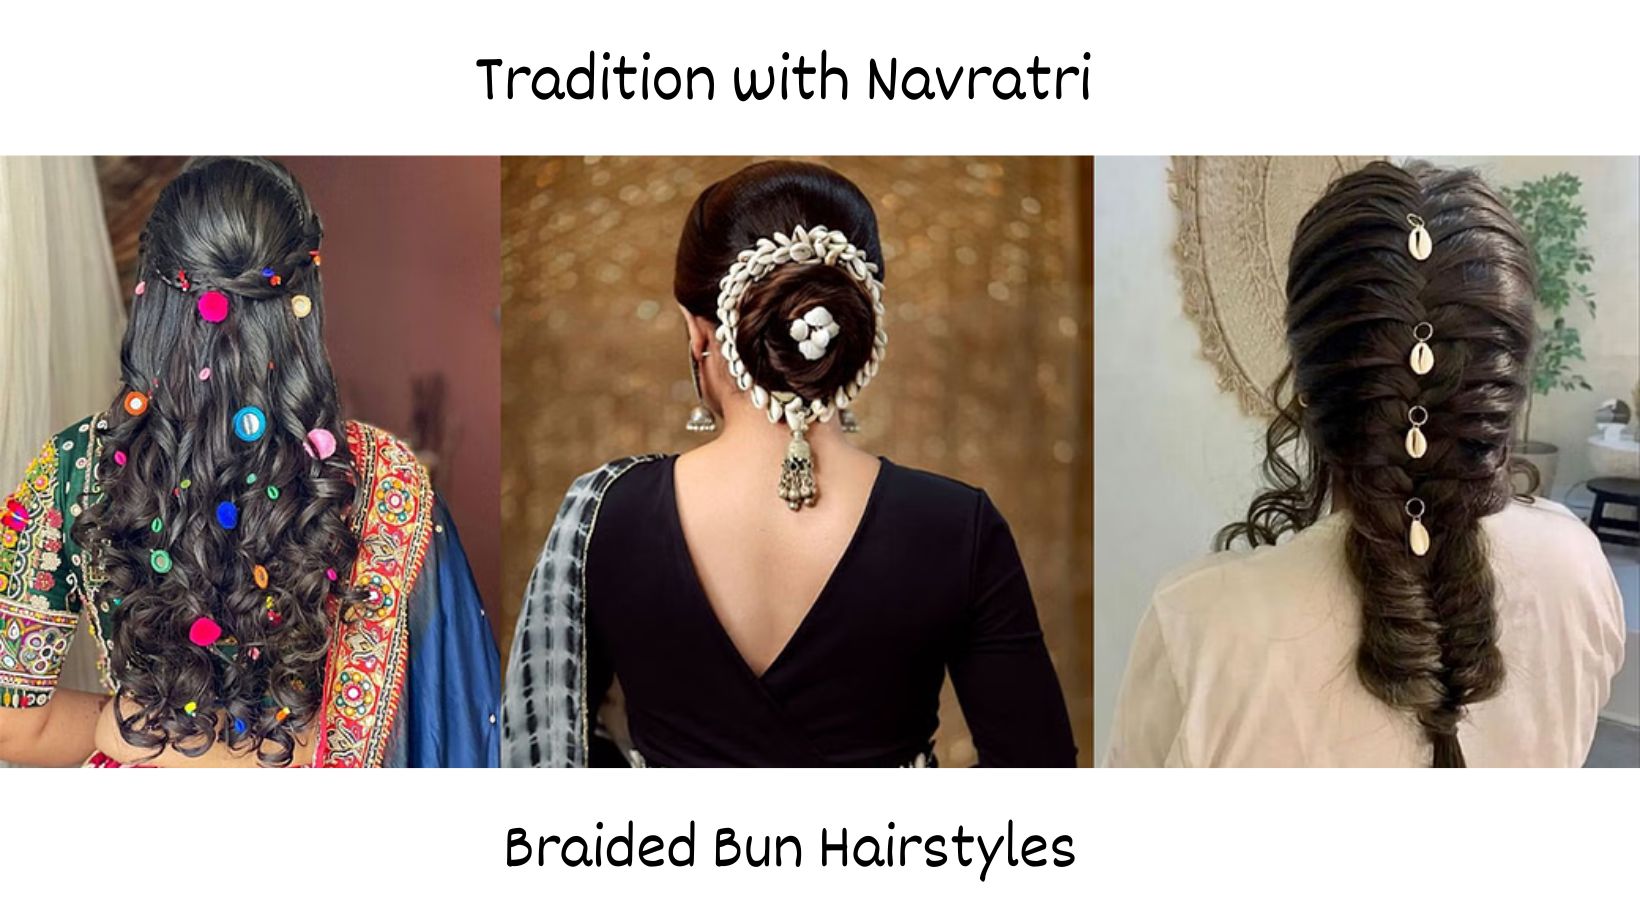 Navratri hairstyle will be incomplete without waterfall braid ✨️ #day6 # navratri #navratrihairstyle #hairhack #navratritrends #202... | Instagram